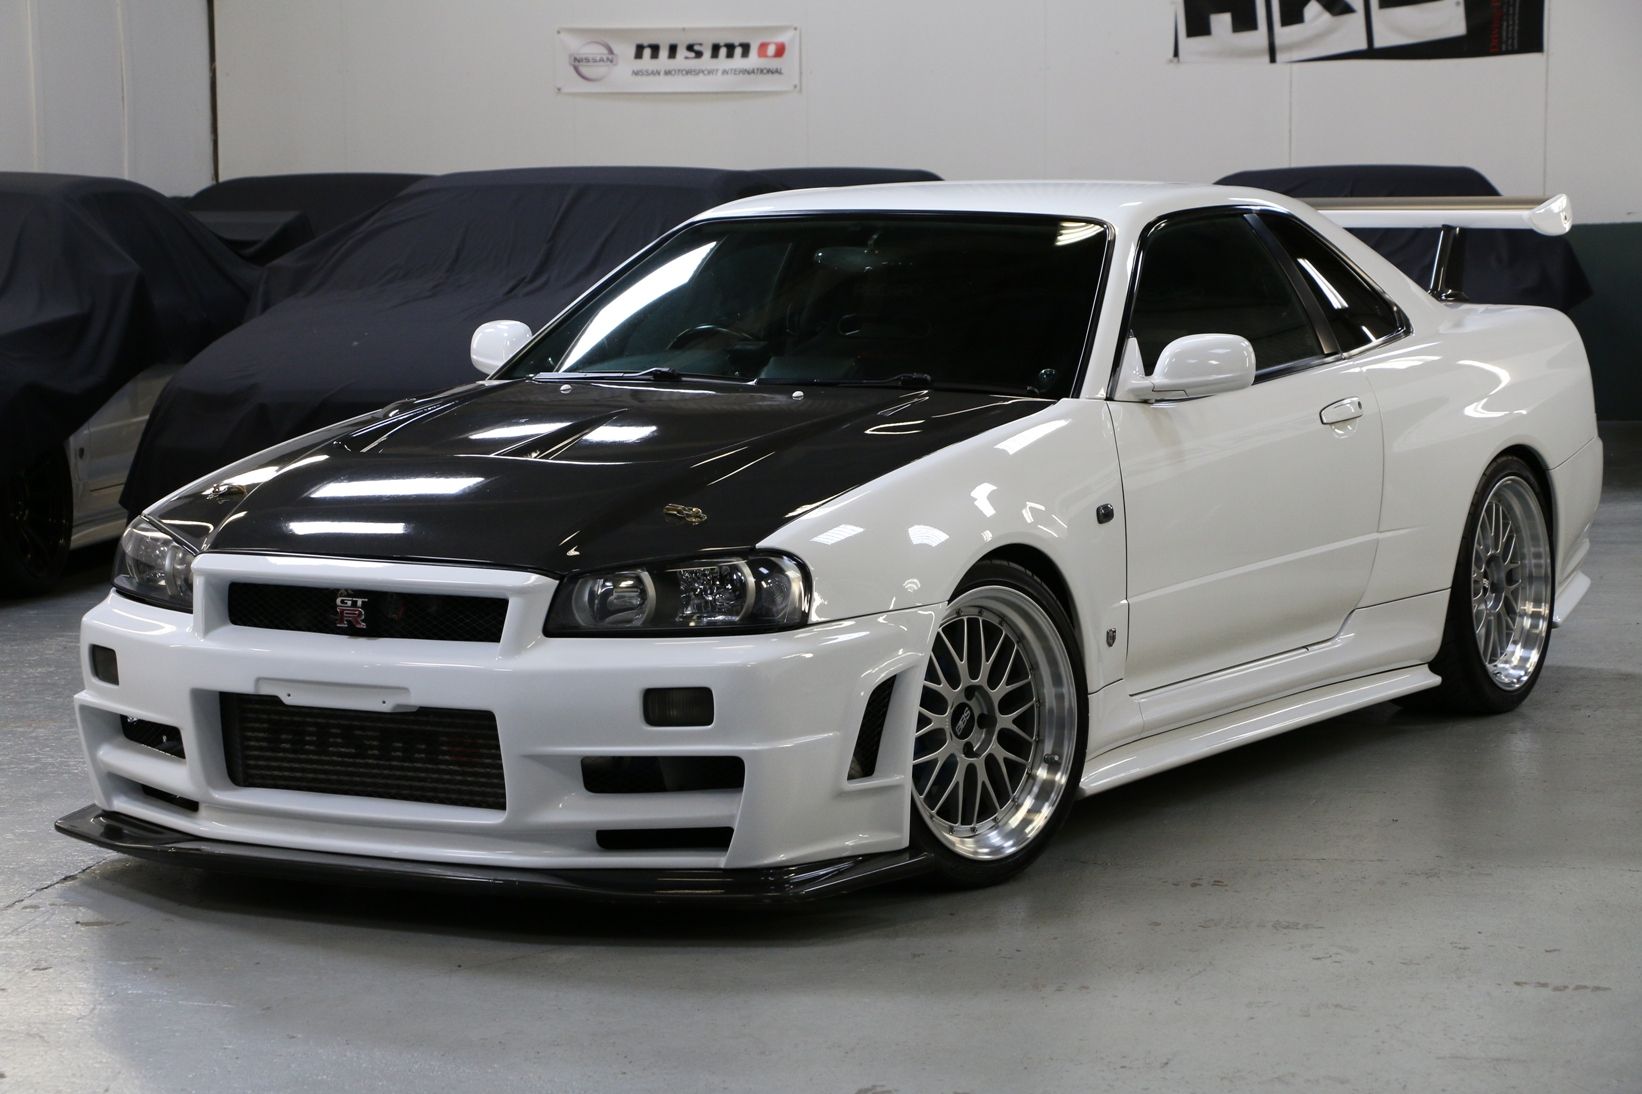 1999 White and Black Nissan GT-R R34